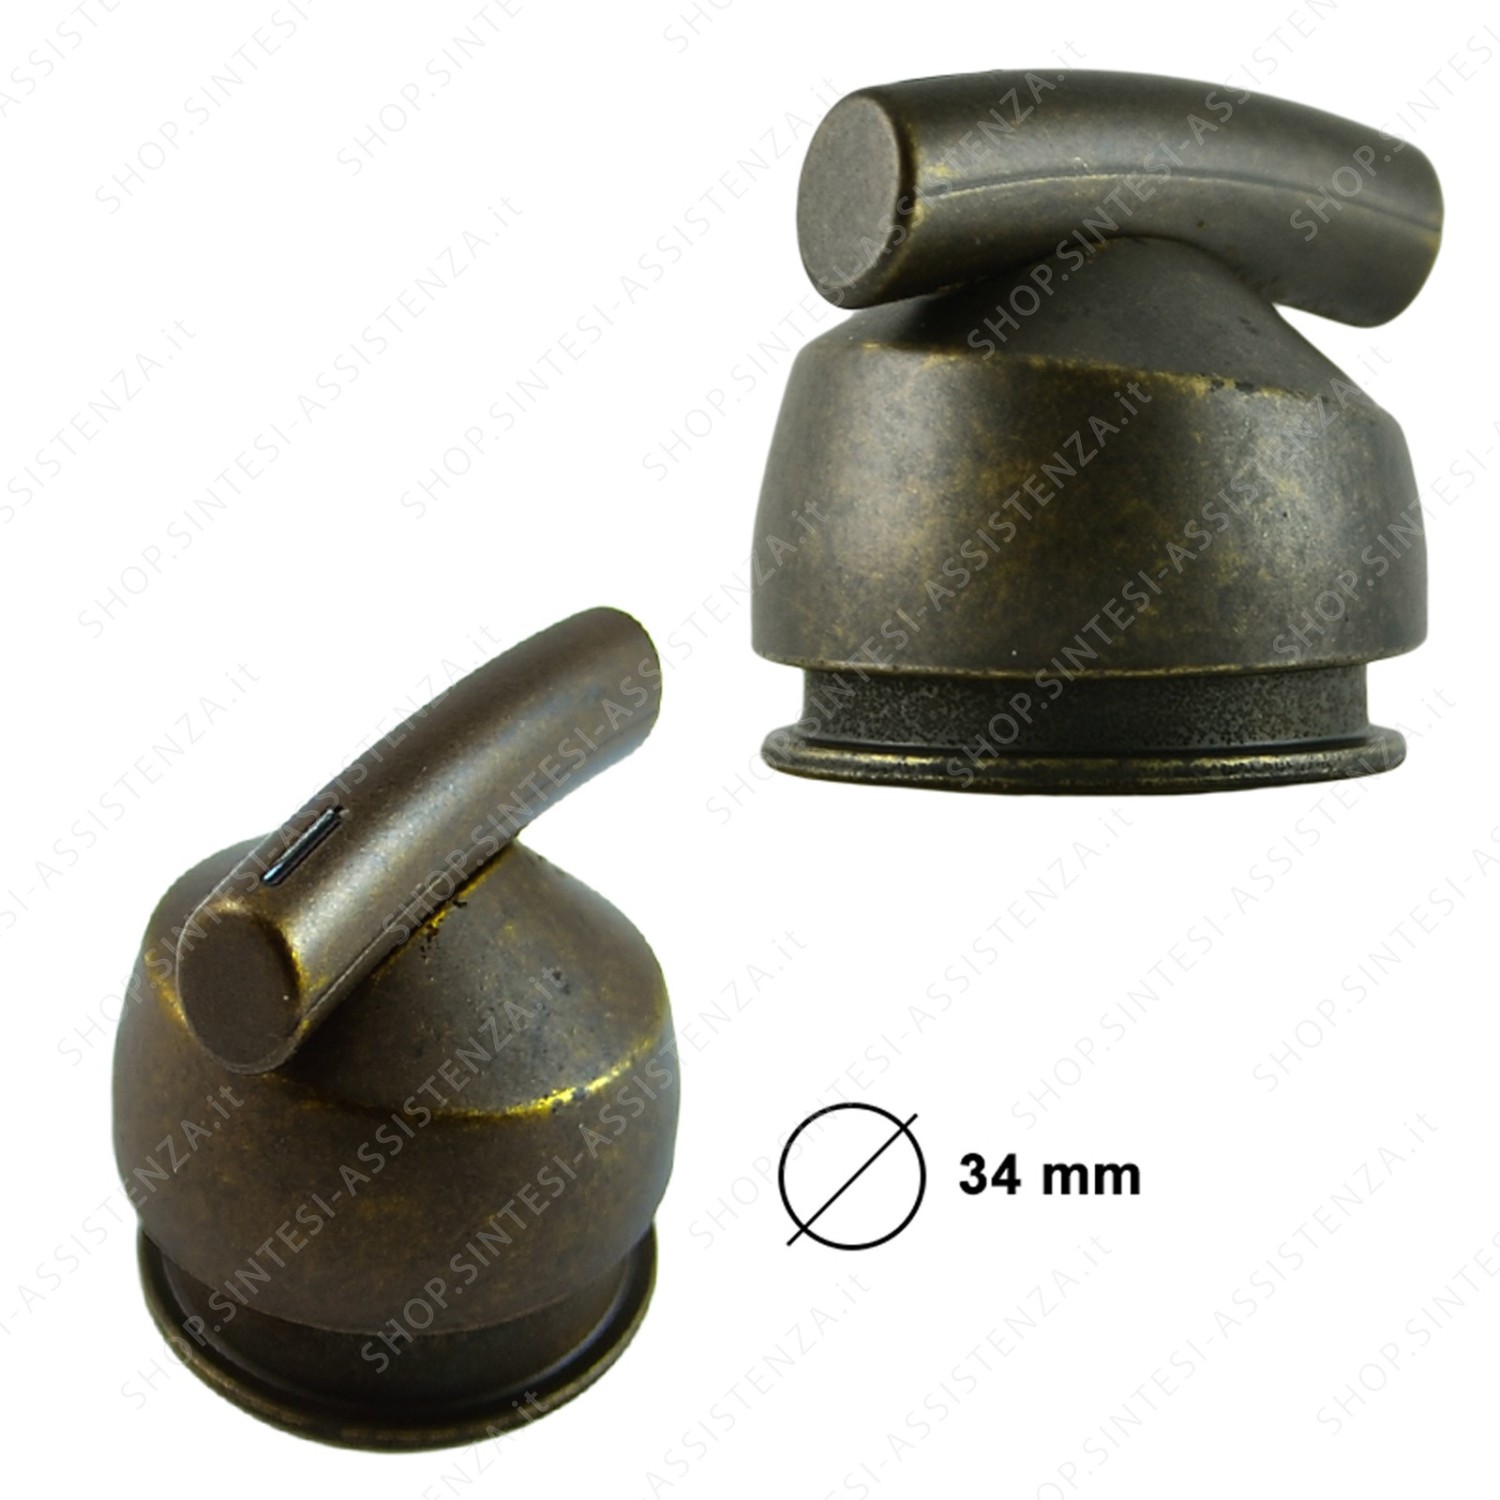 FRANKE HOB AND OVEN KNOB BRONZE METAL COUNTRY SERIES - 133.0198.111 FR